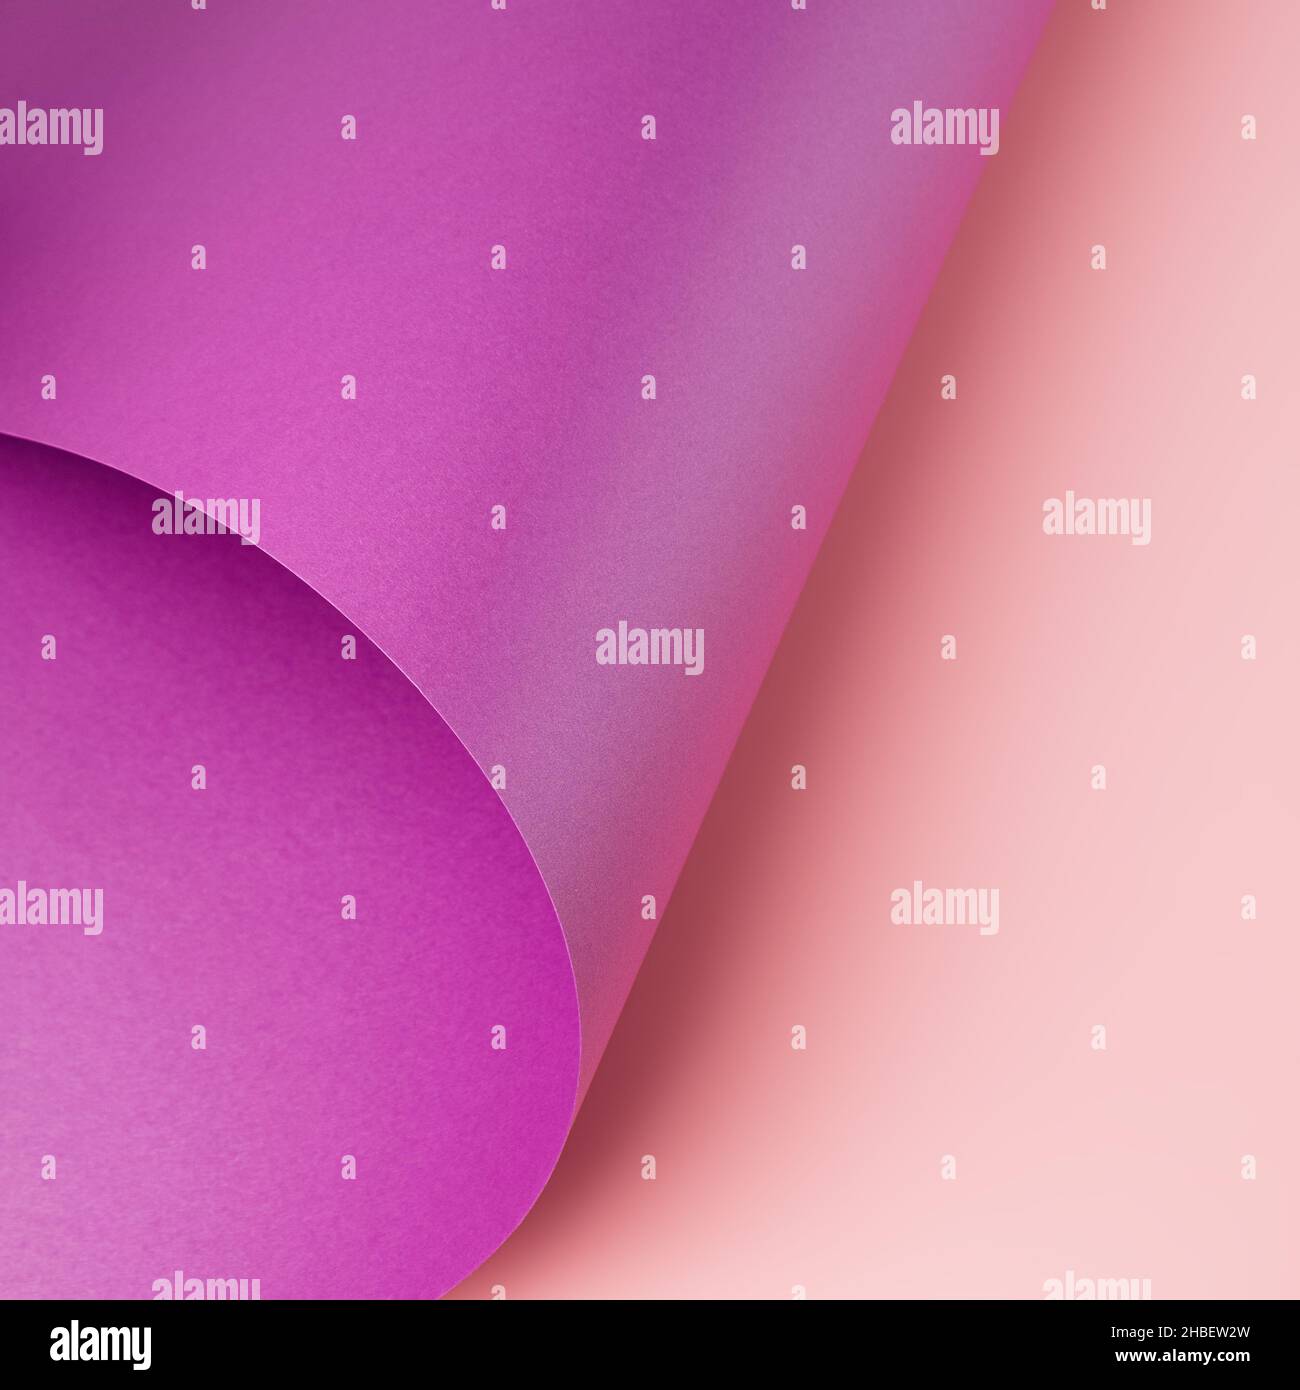 Metallic violet paper curved over light pink background. Minimal colorful backdrop Stock Photo